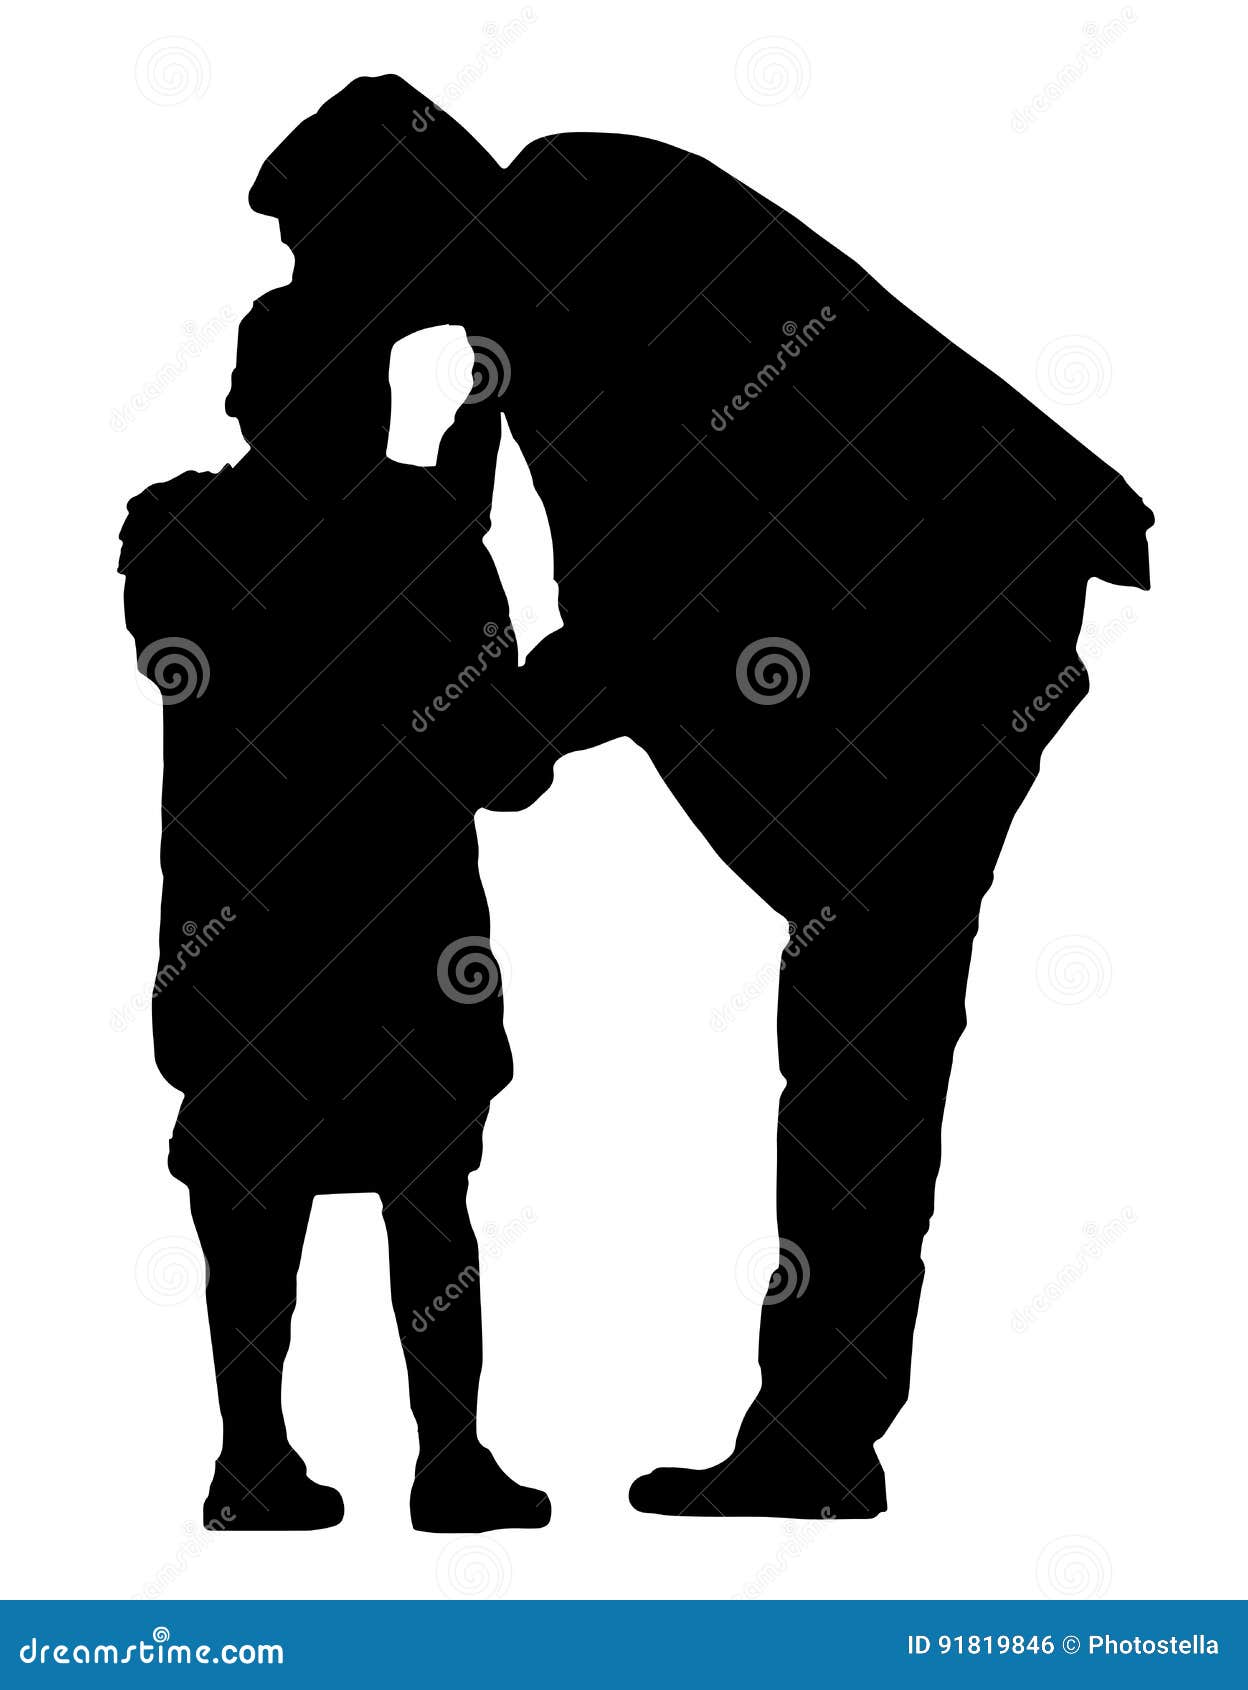 Father And Daughter Vector - Black Silhouettes Stock ...